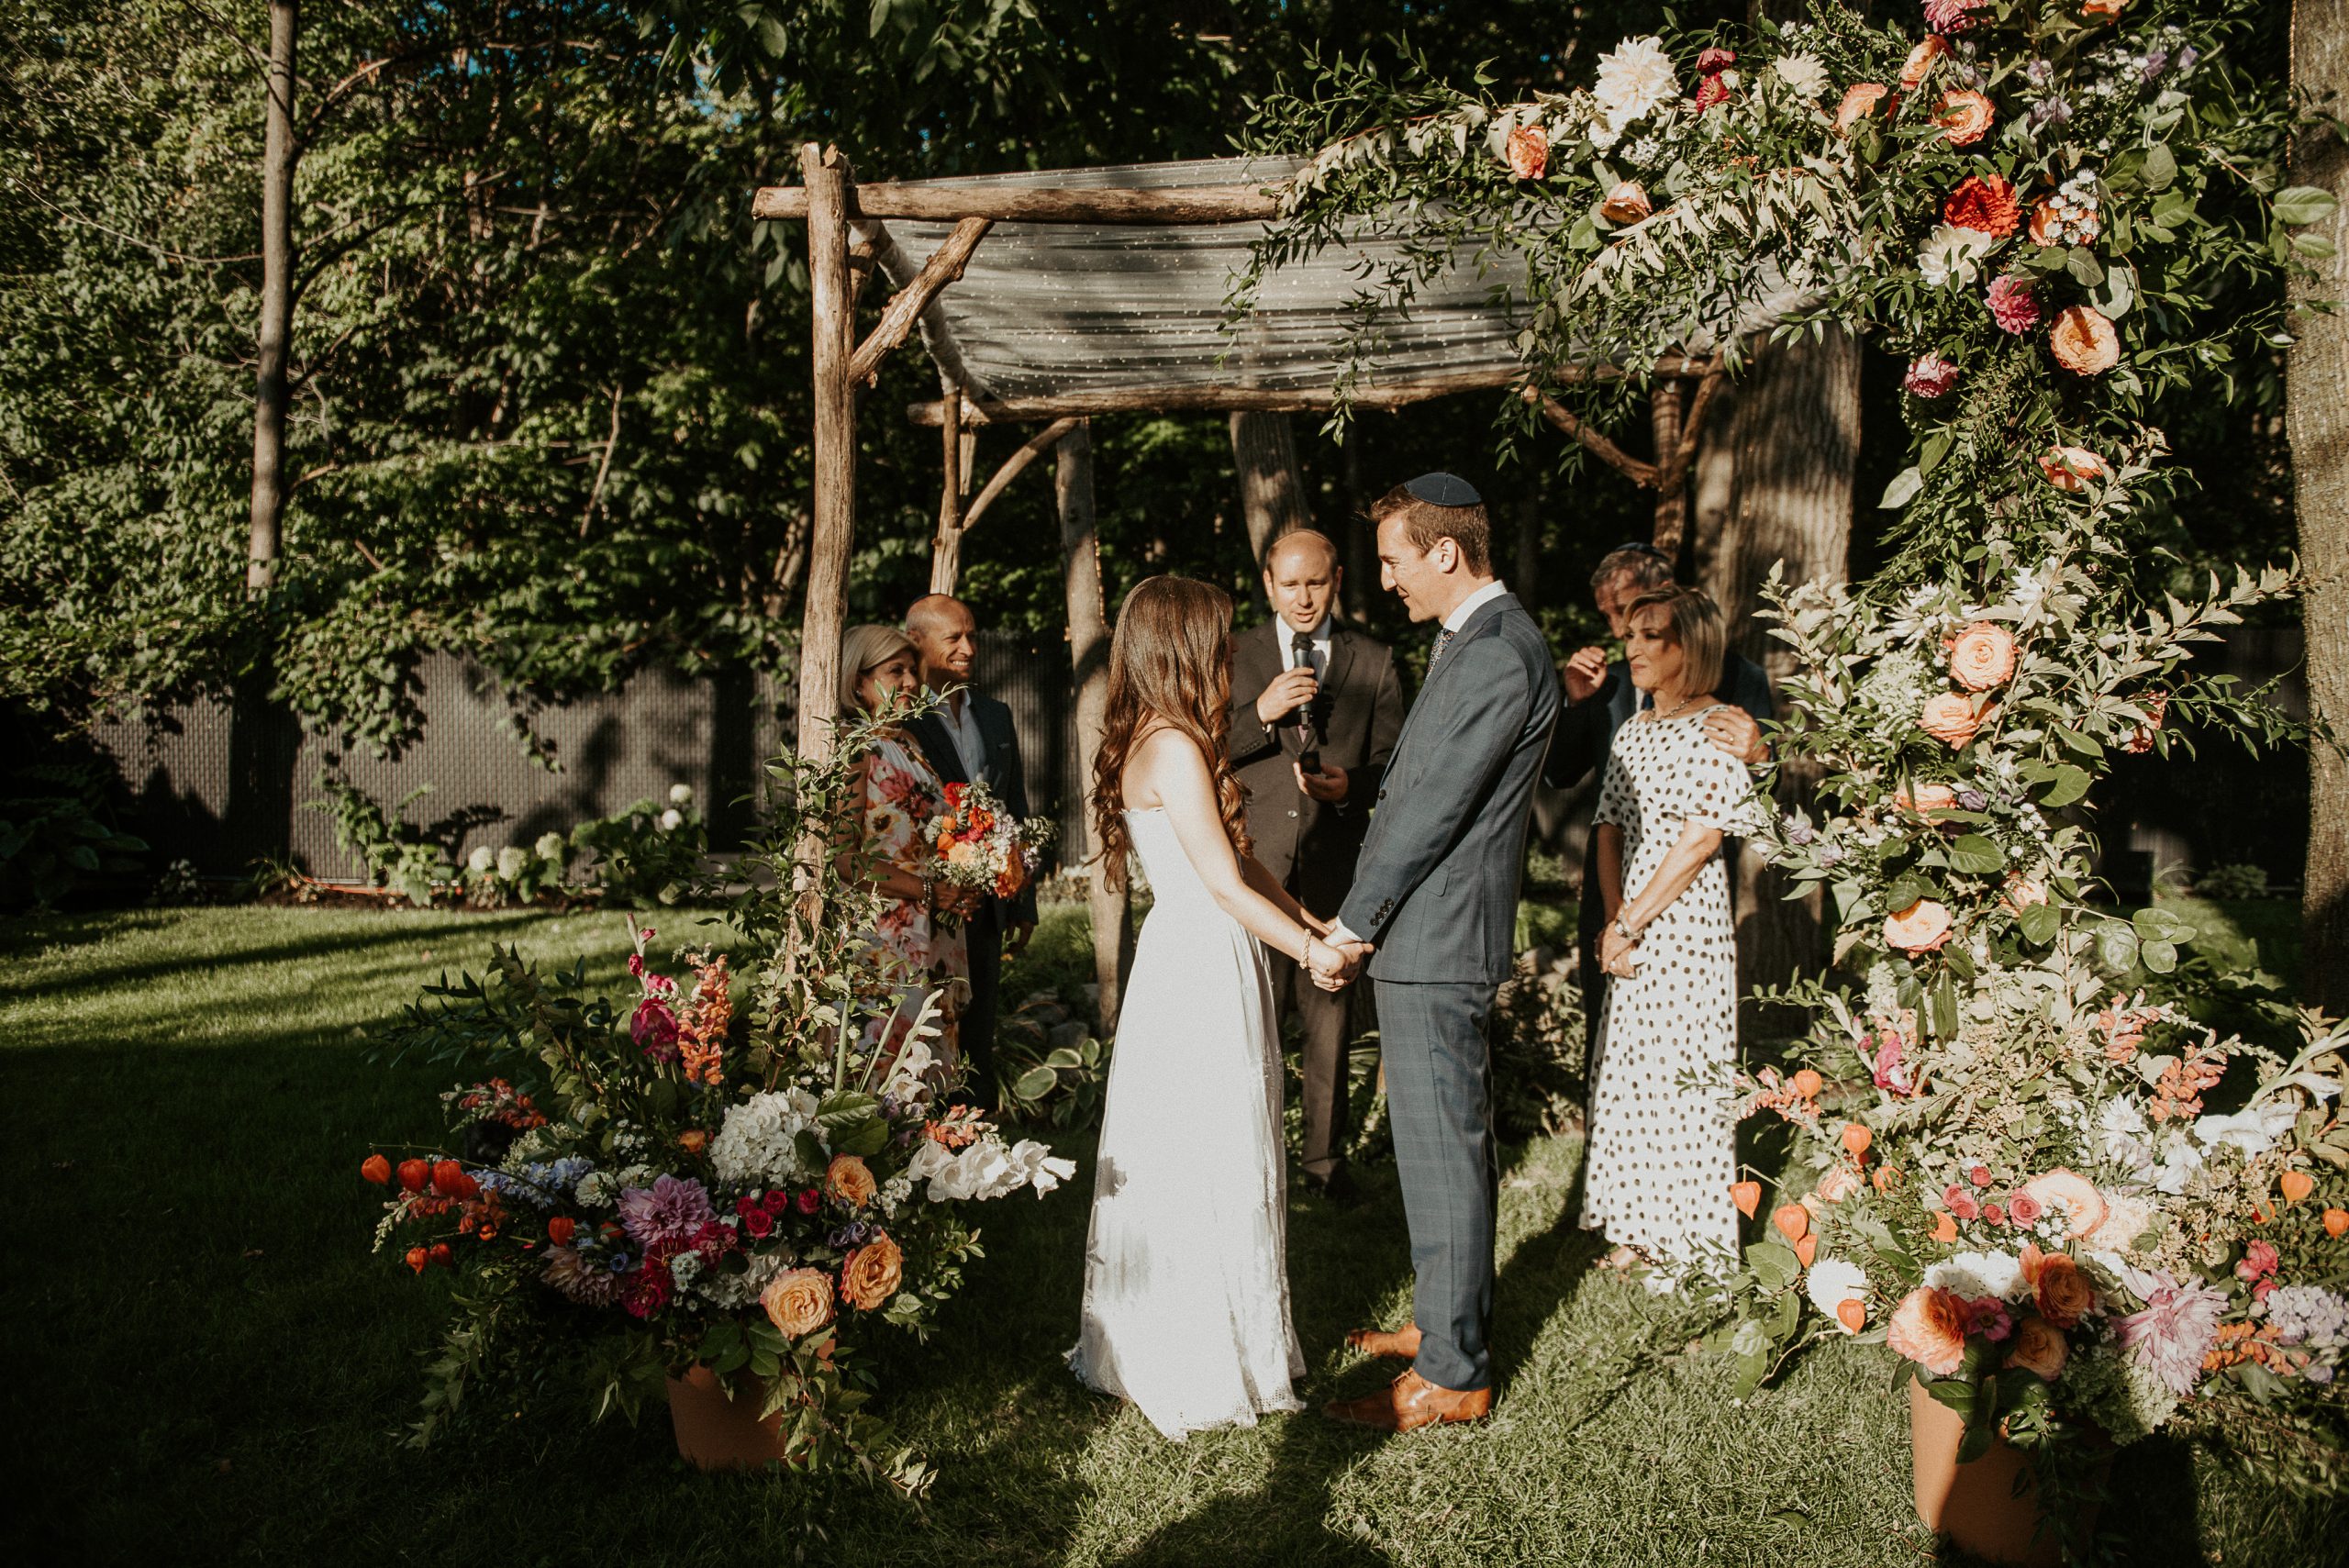 Bride and Groom with family under colourful summer chuppah at outdoor backyard wedding ceremony | L'Orangerie Photographie | Flourish & Knot